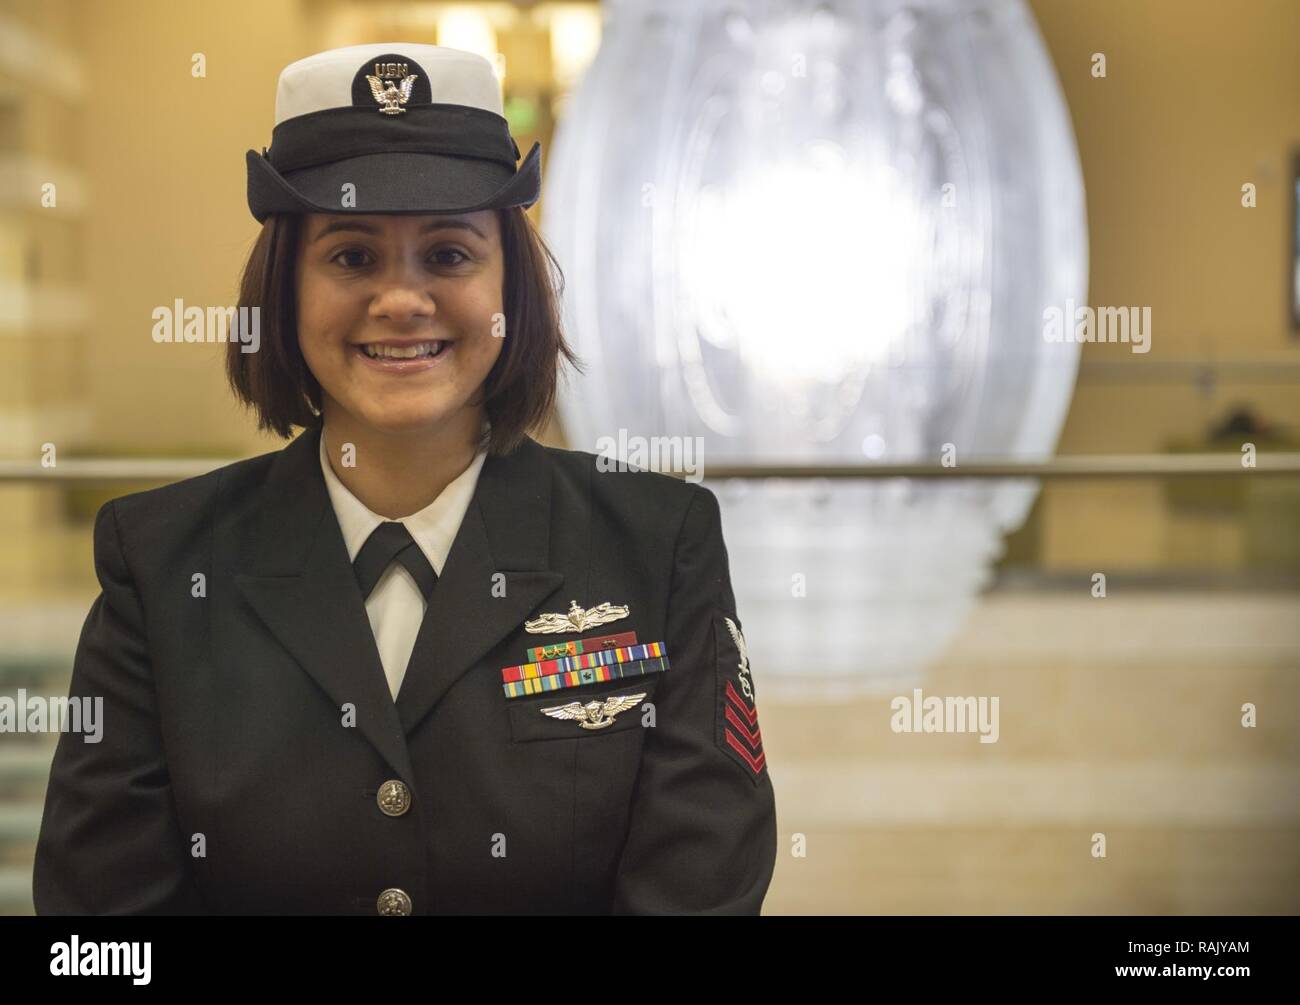 VIRGINIA BEACH, Va. (Feb. 6, 2017) Operations Specialist First Class Ciria Howe, representing Afloat Training Group Atlantic, poses for a portrait during Sailor of the Year (SOY) week. The SOY program was established in 1972 by Chief of Naval Operations Adm. Elmo Zumwalt and Master Chief Petty Officer of the Navy John Whittet to recognize an individual Sailor who best represented the ever-growing group of dedicated professional Sailors at each command and ultimately the Navy. The SURFLANT Sea and Shore SOY selected at the end of this week will advance to compete for SOY at U.S. Fleet Forces Co Stock Photo